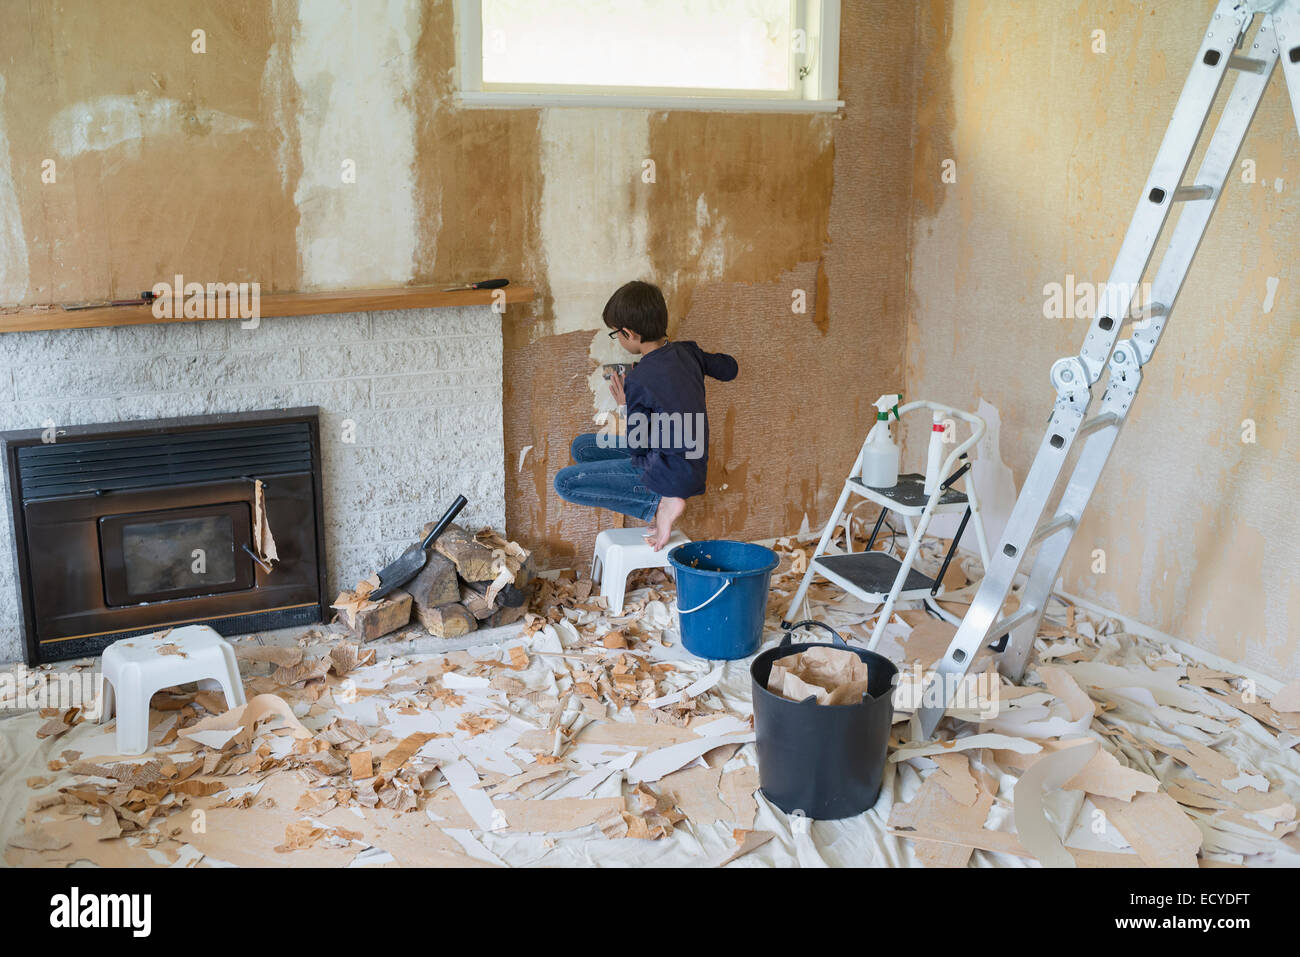 Mixed race boy stripping wallpaper in living room Stock Photo